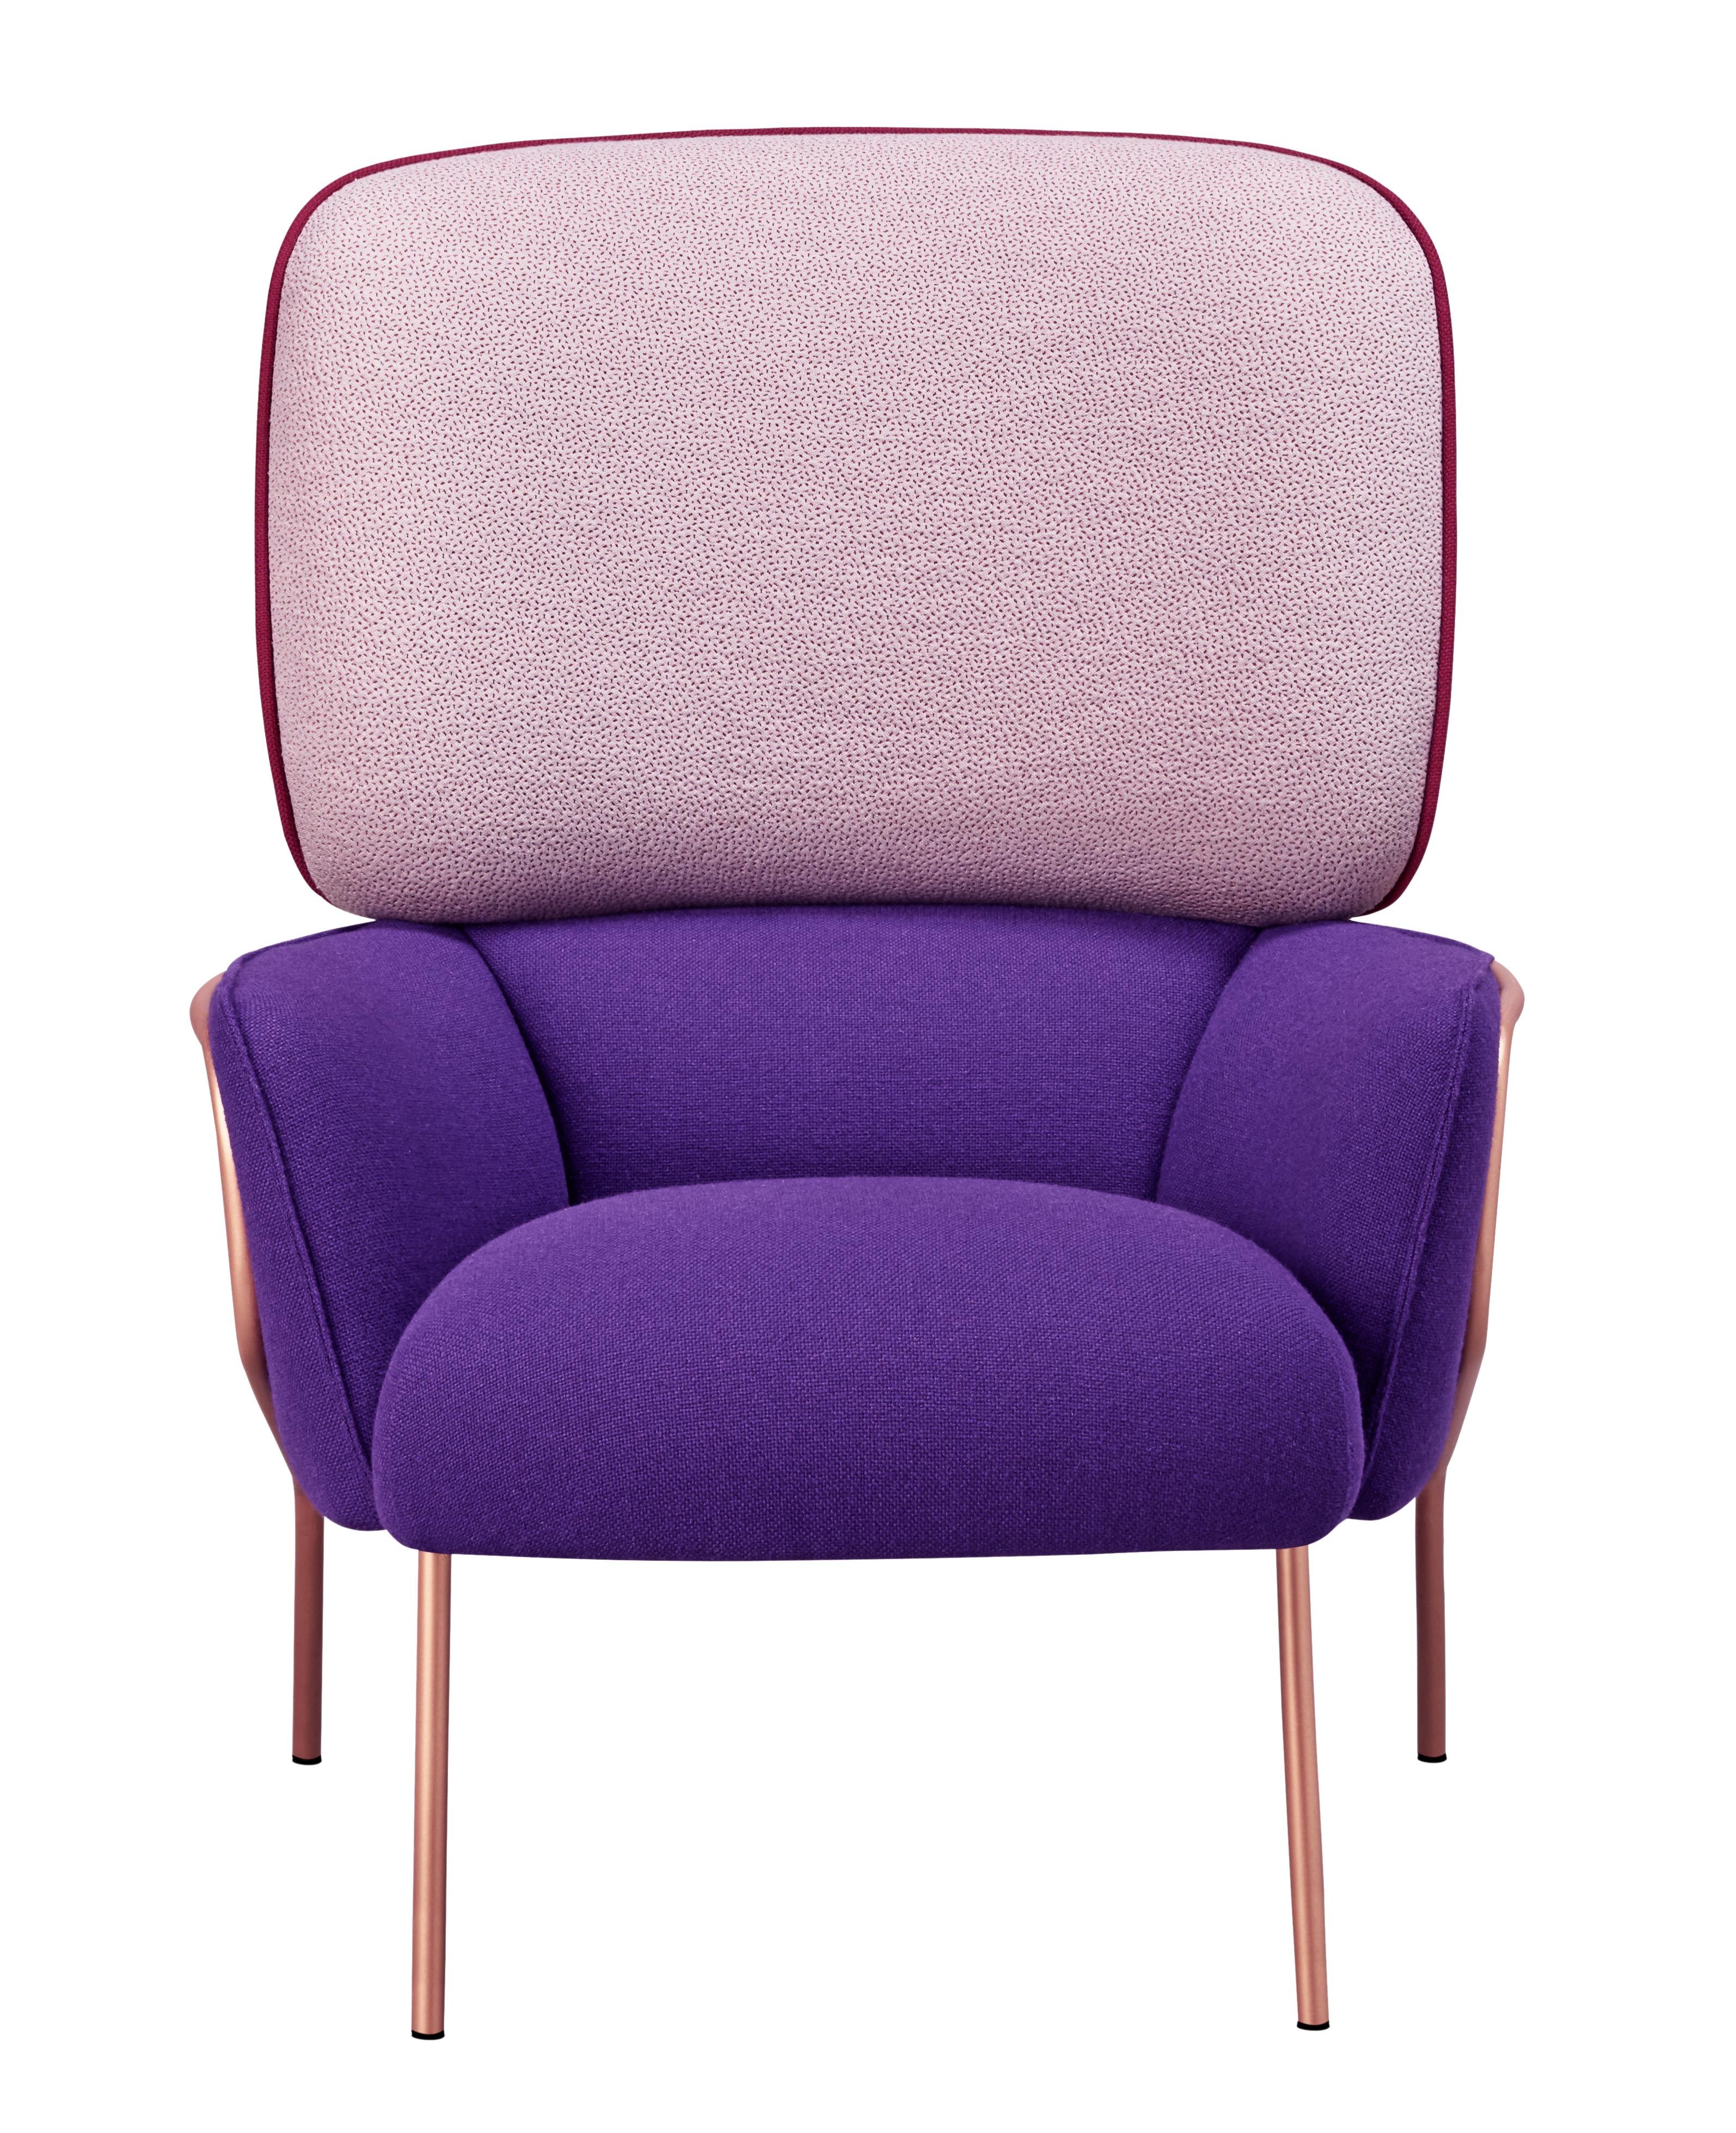 Cotton armchair - purple by Eli Gutiérrez
Dimensions: W78, D90, H104, Seat 43
Materials: Pinewood structure reinforced with plywood and tablex
Foam CMHR (high resilience and flame retardant) for all our cushion filling systems
Painted or chromed